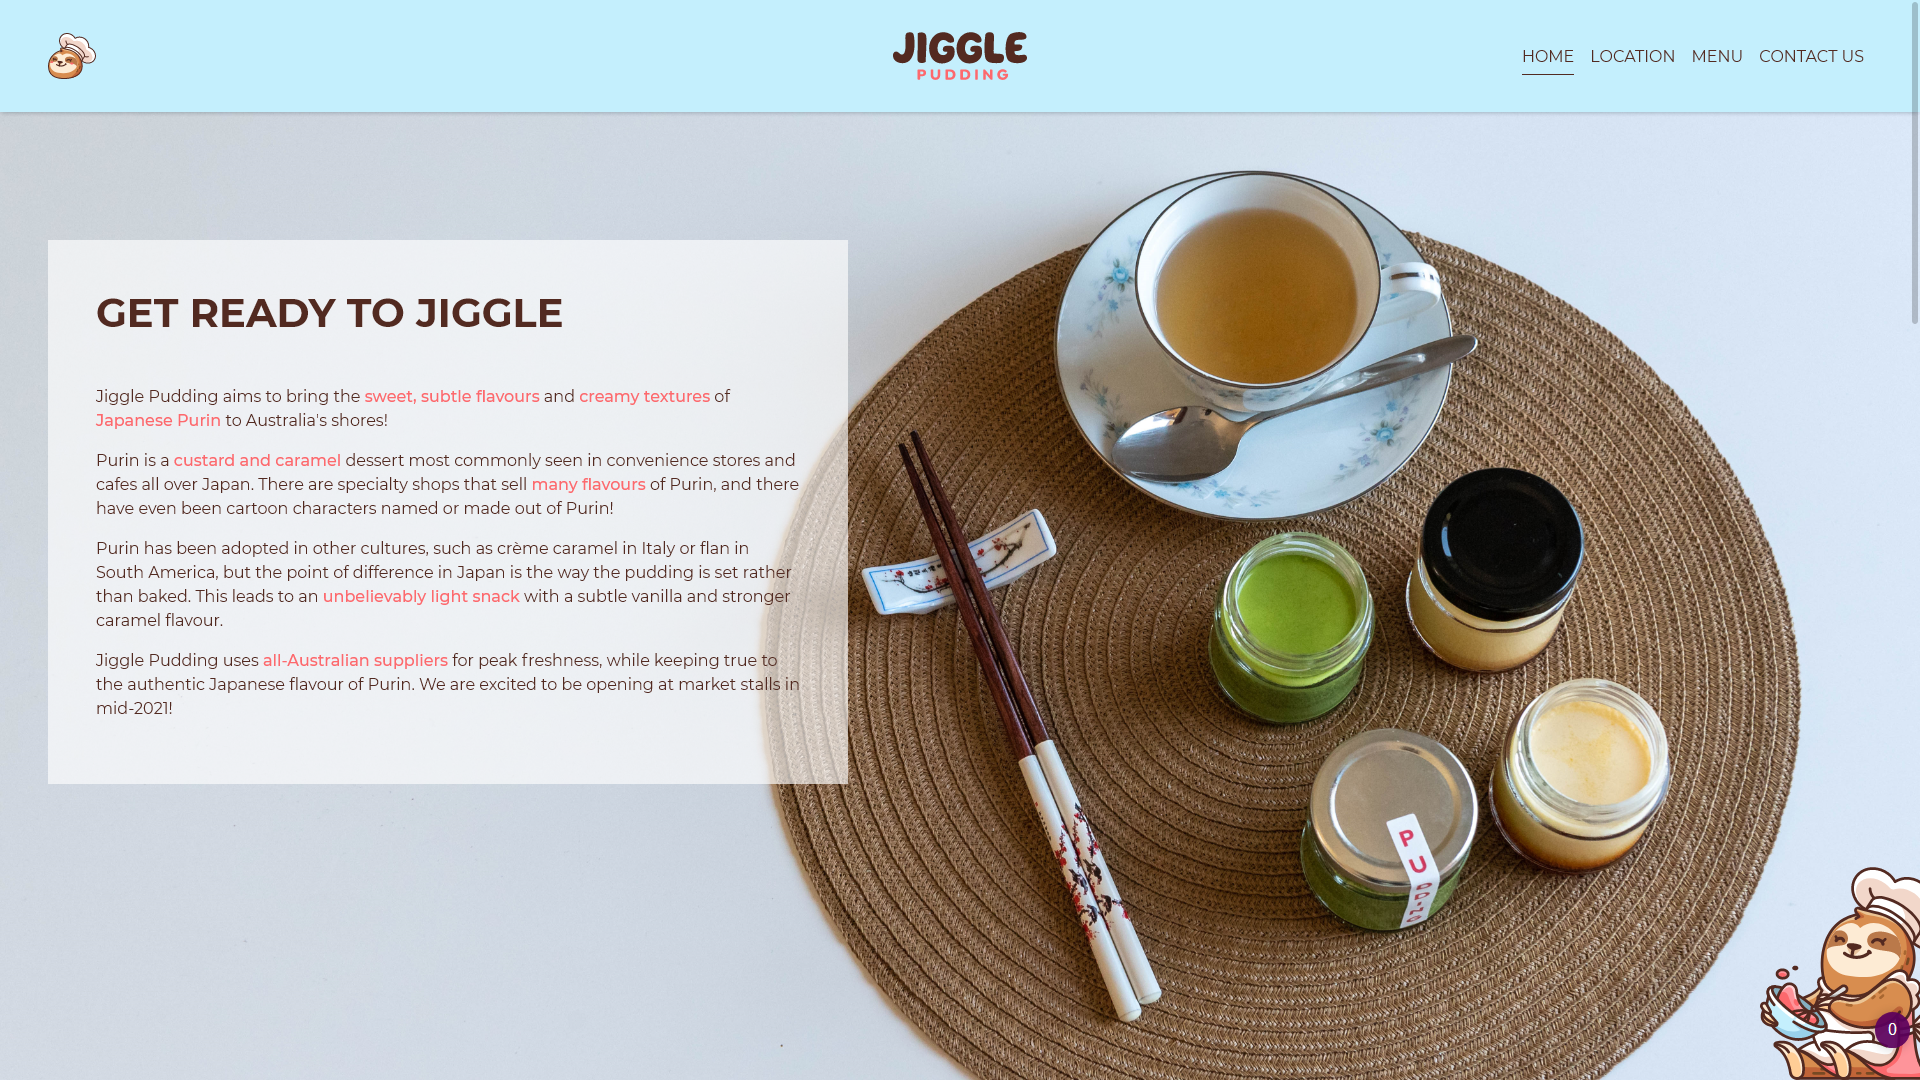 The landing page of Jiggle Pudding